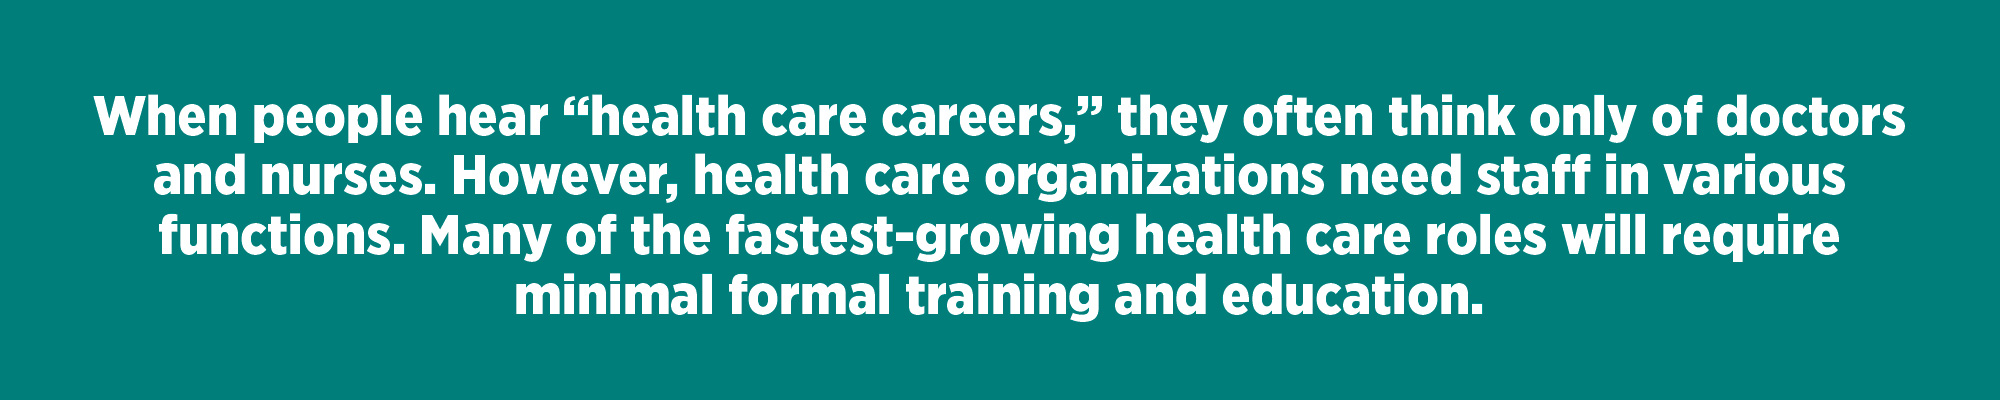 When people hear “health care careers,” they often think only of doctors and nurses. However, health care organizations need staff in various functions. Many of the fastest-growing health care roles will require minimal formal training and education.